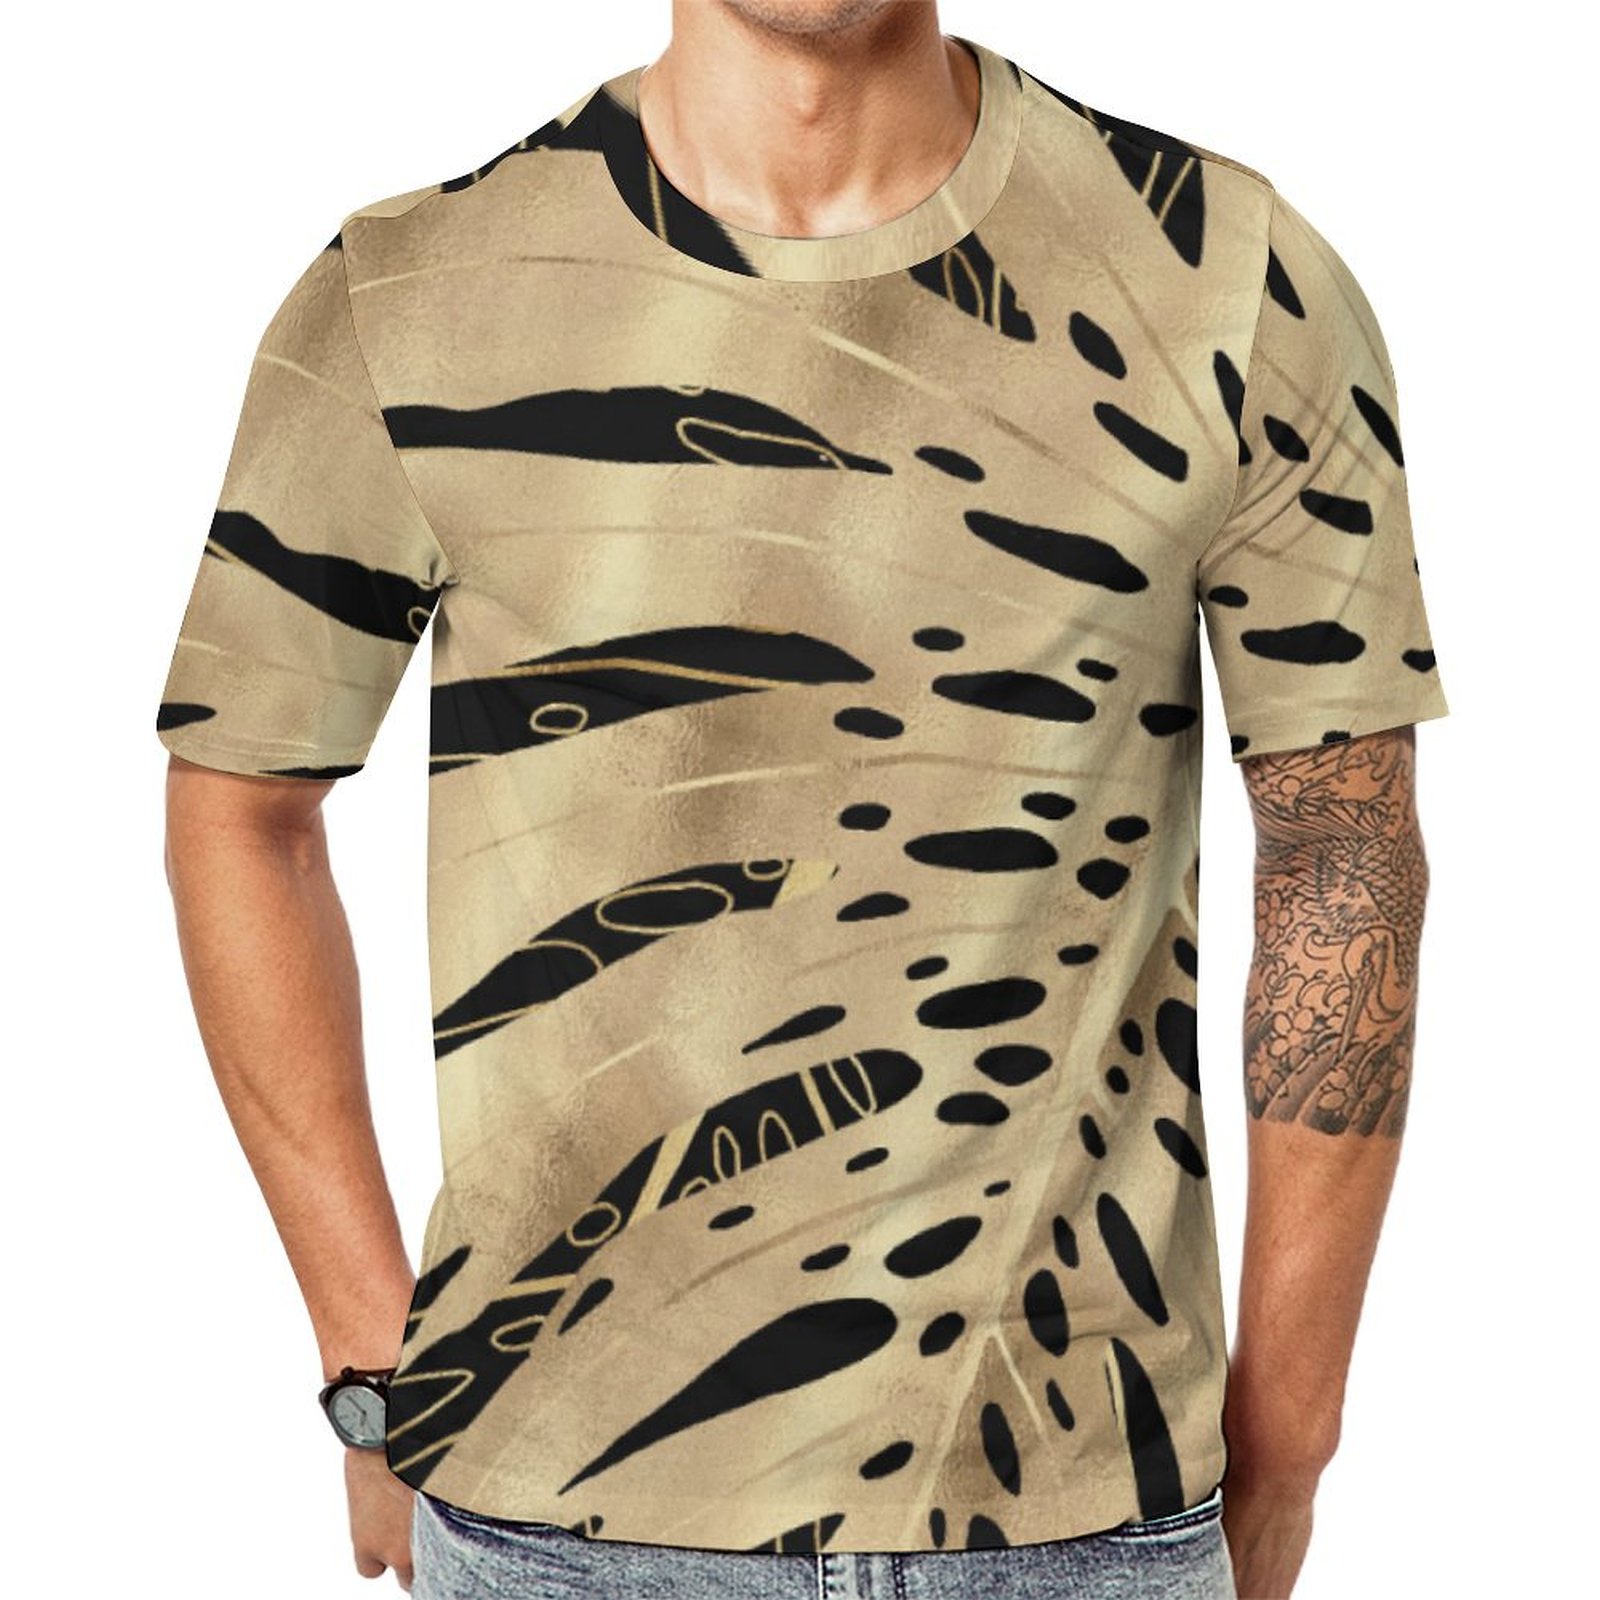 Tropical Gold Monstera Leaf Black Design Short Sleeve Print Unisex Tshirt Summer Casual Tees for Men and Women Coolcoshirts